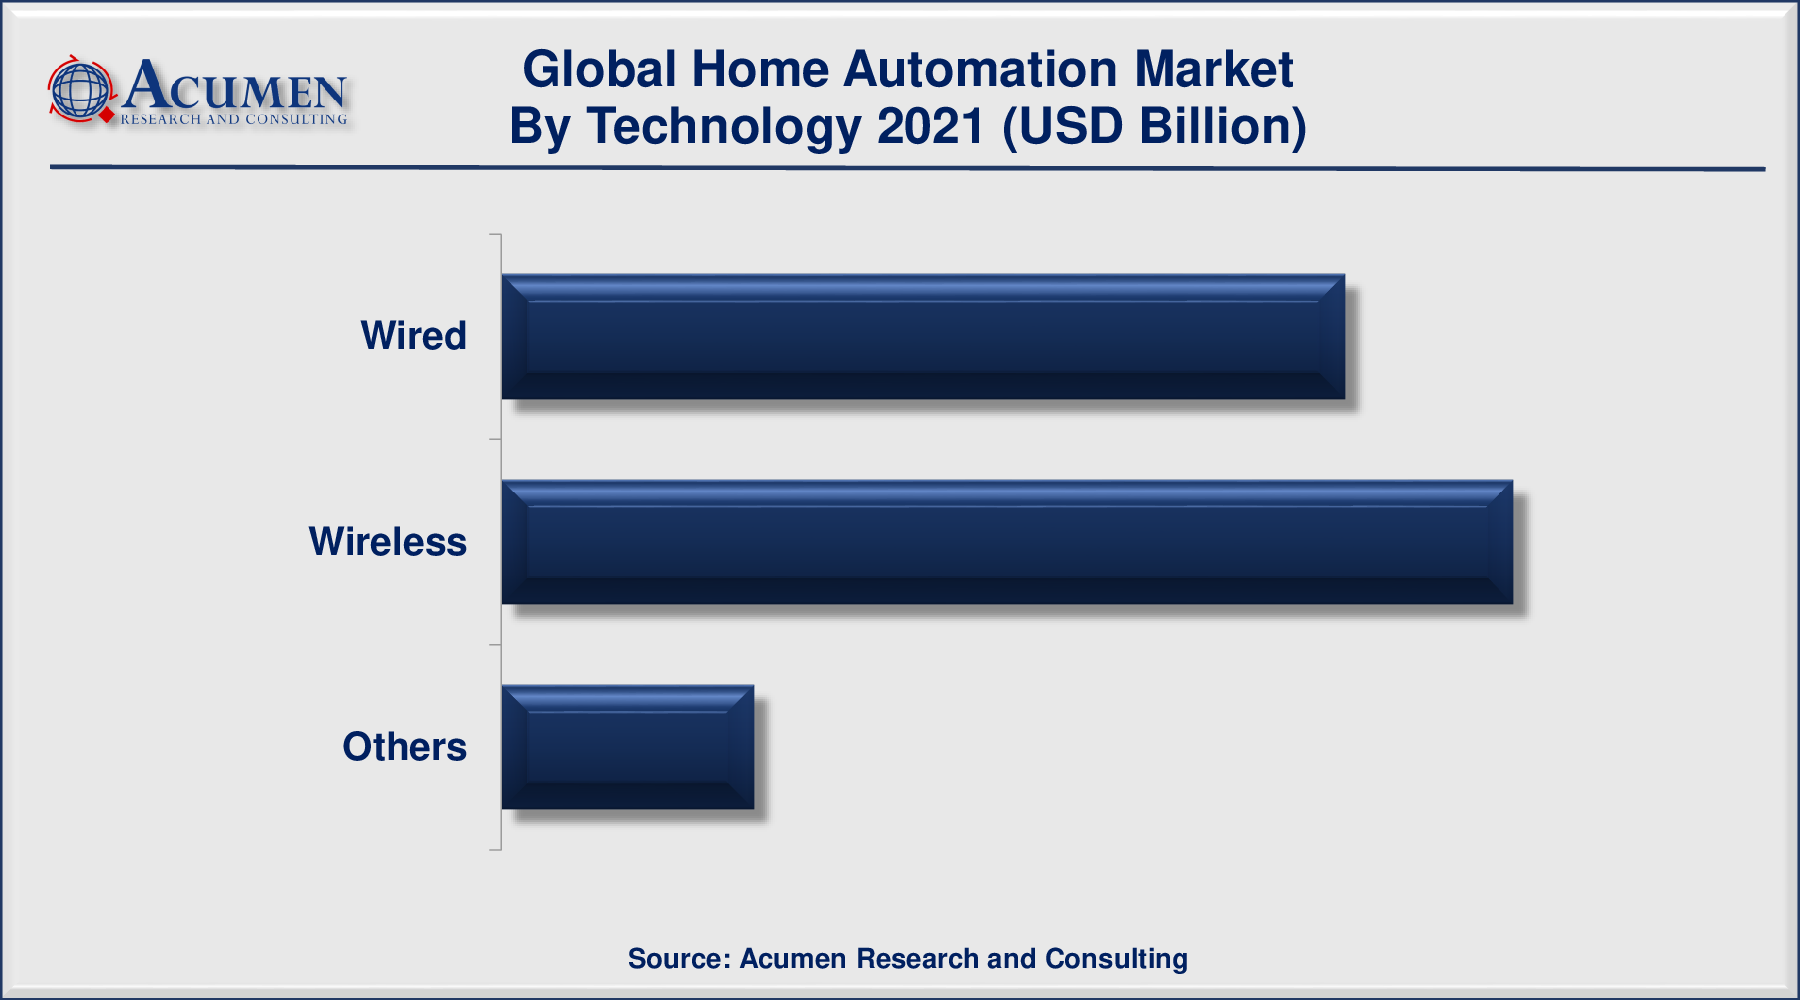 Home Automation Market size Accounted for USD 53.4 Billion in 2021 and is predicted to be worth USD 136.5 Billion by 2030, with a CAGR of 11.2% during the projected period from 2022 to 2030.